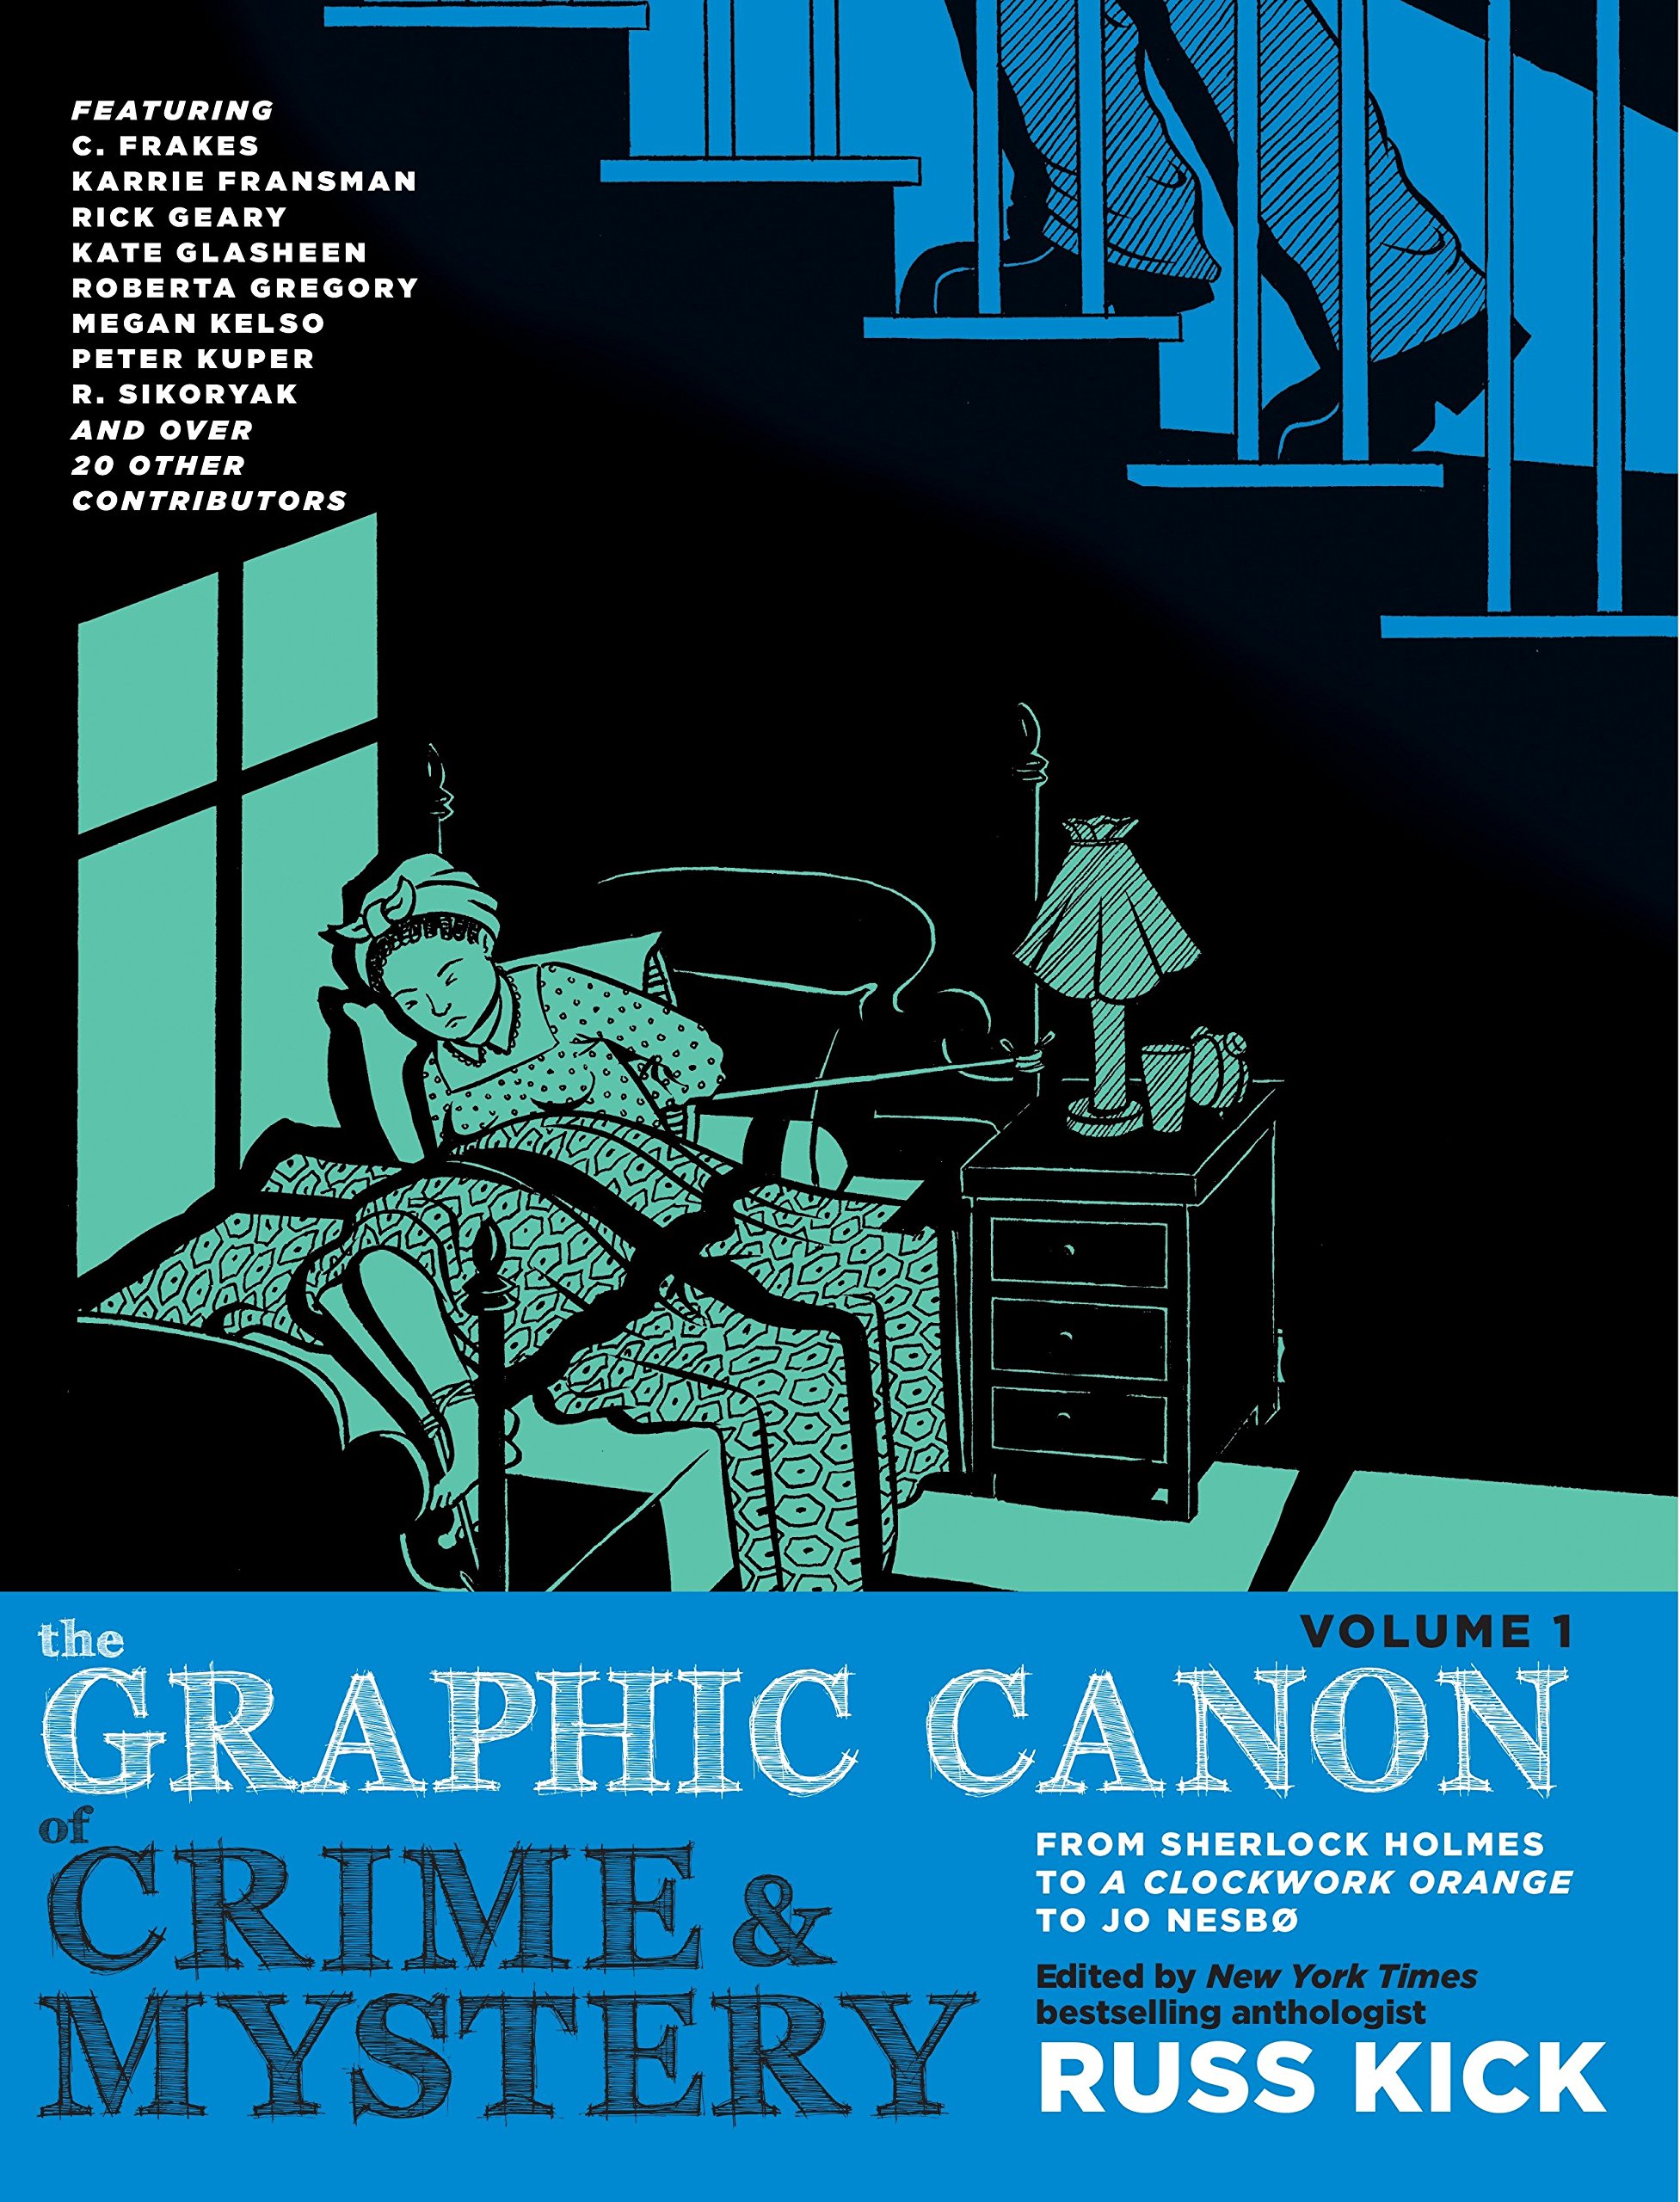 The Graphic Canon Of Crime And Mystery Vol. 1 | Russ Kick